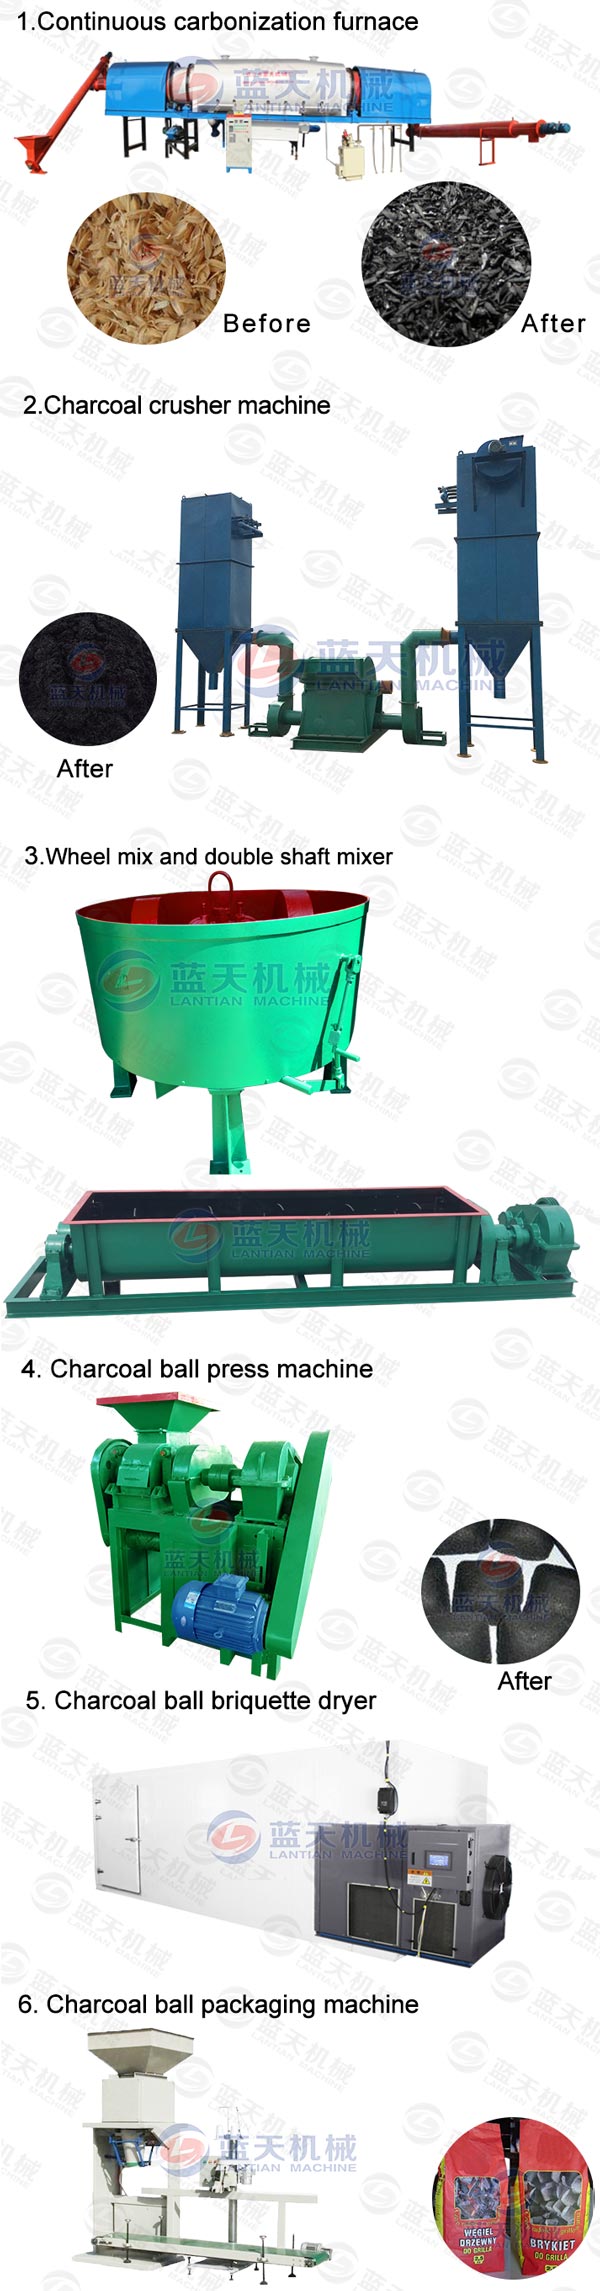 Product Line of Charcoal Briquette Packing Machine